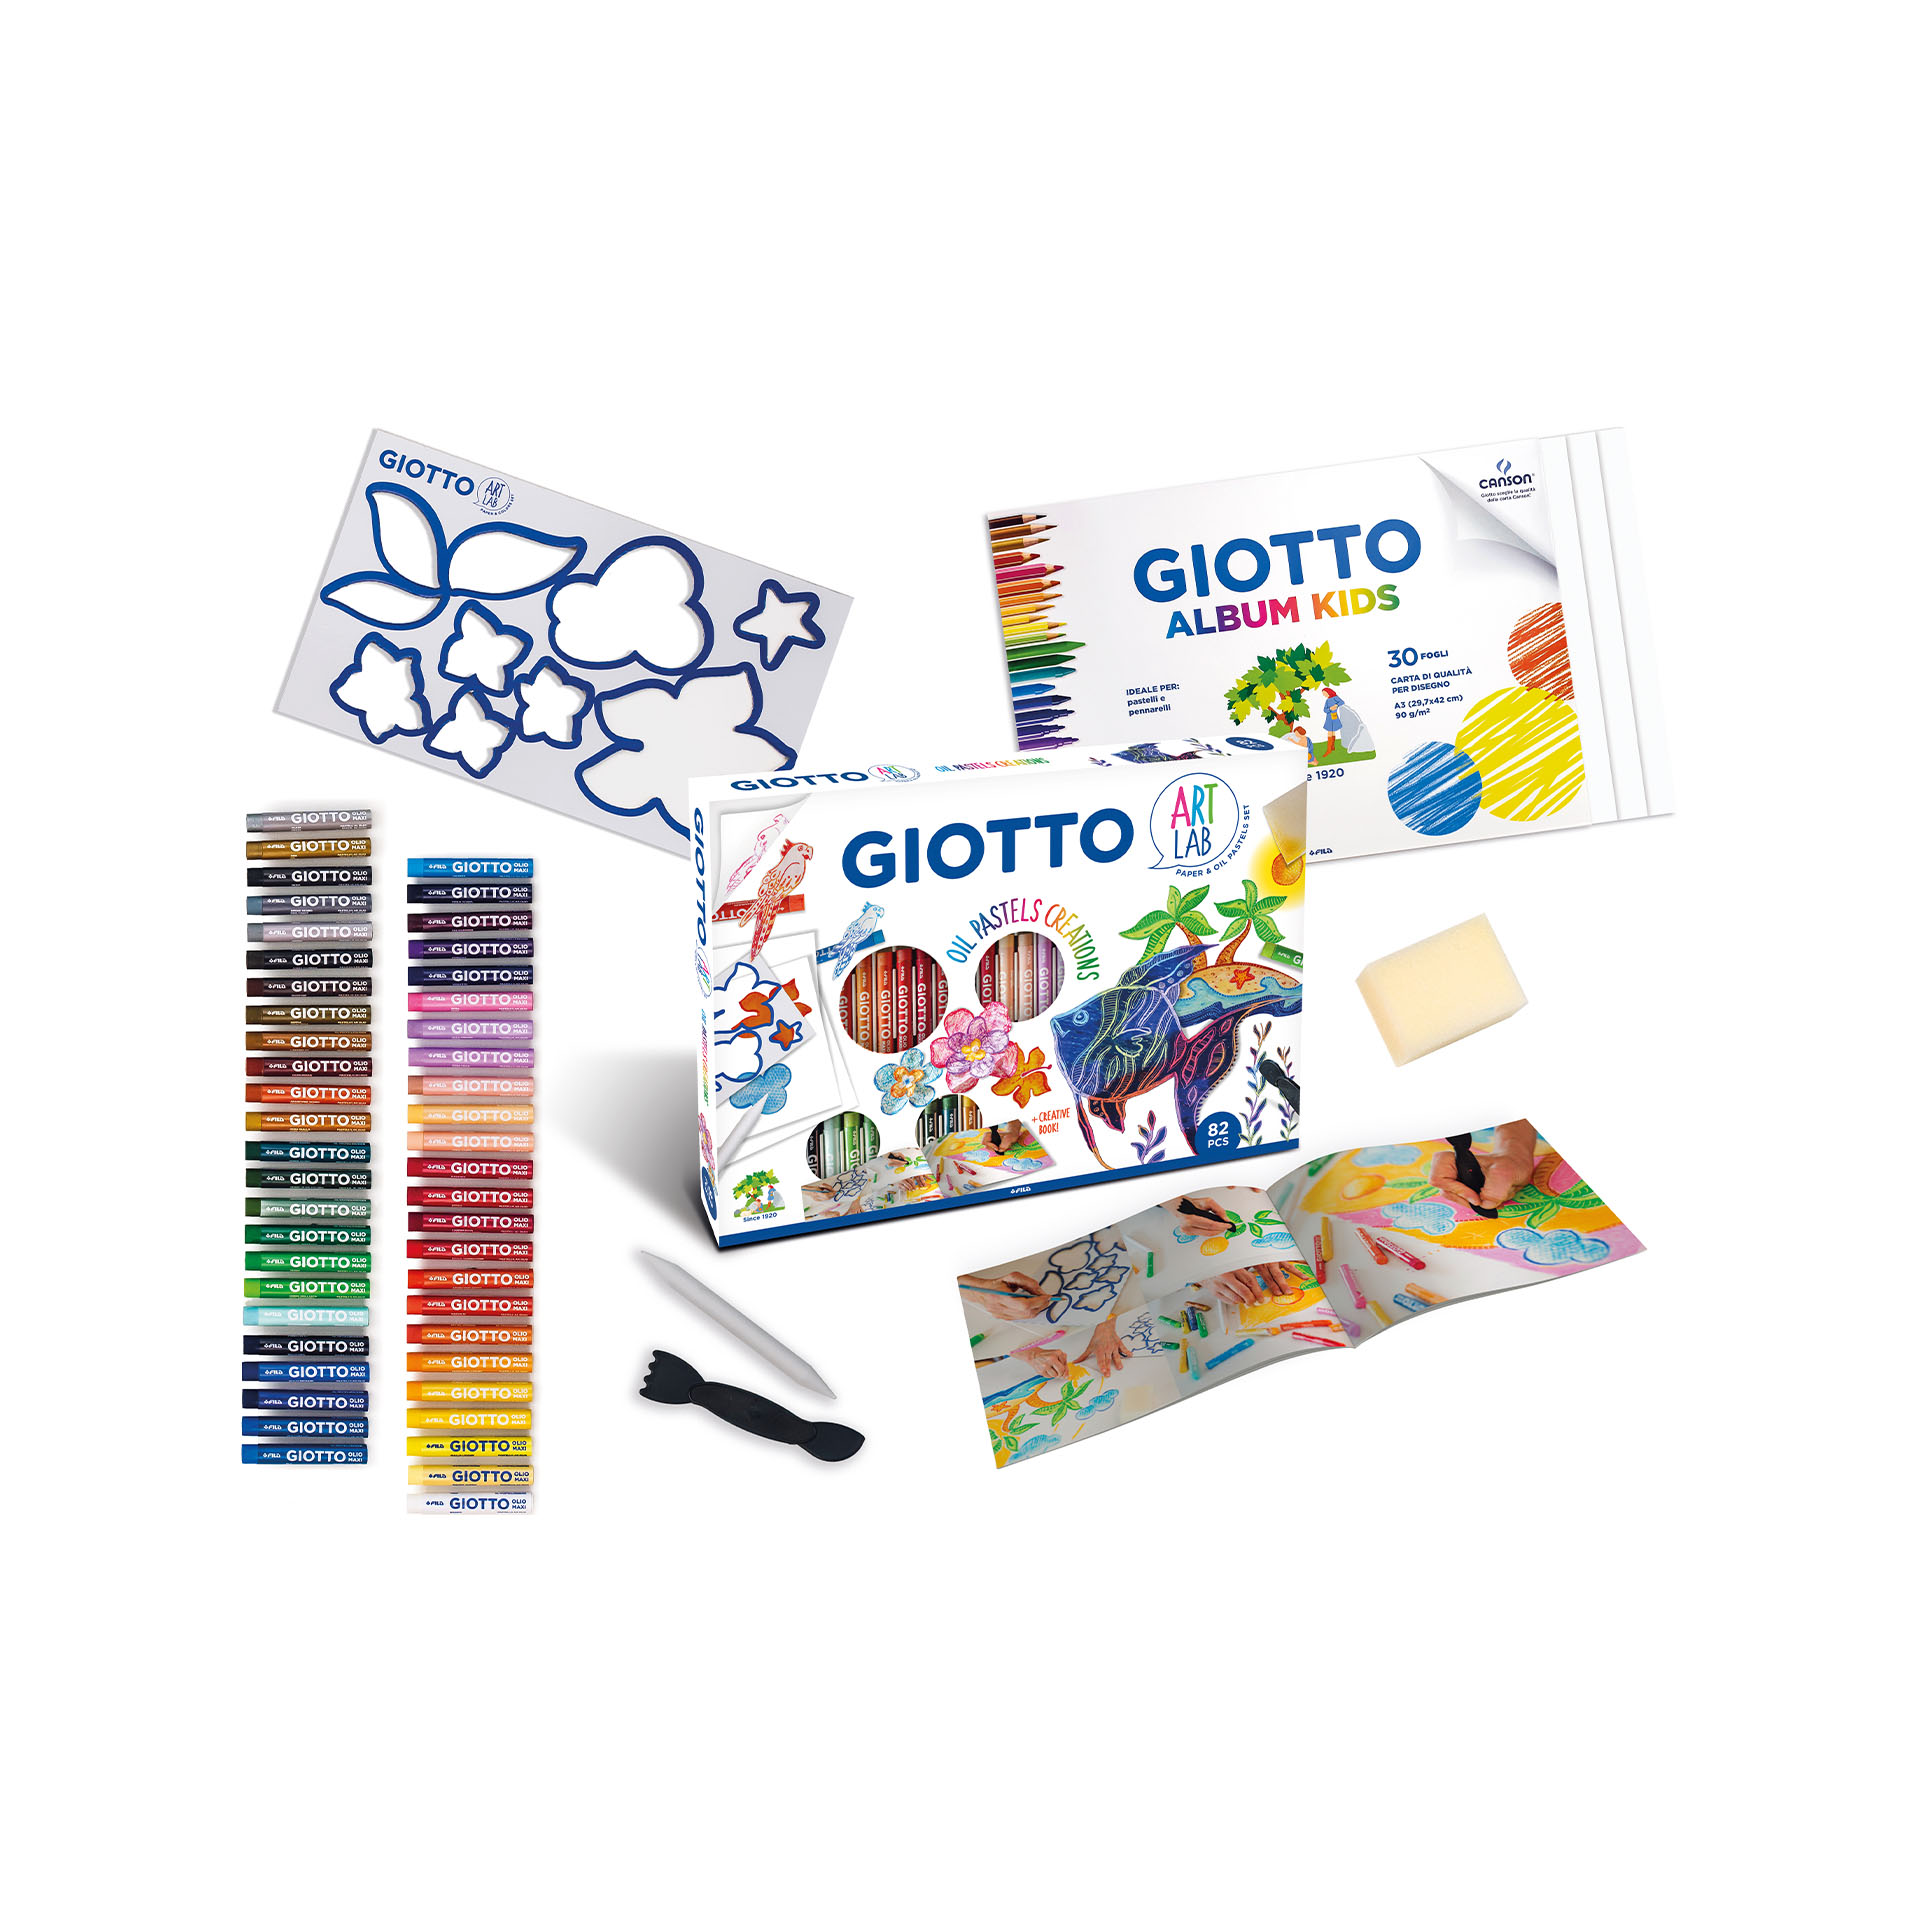 Giotto Art Lab Oil Pastels, , large